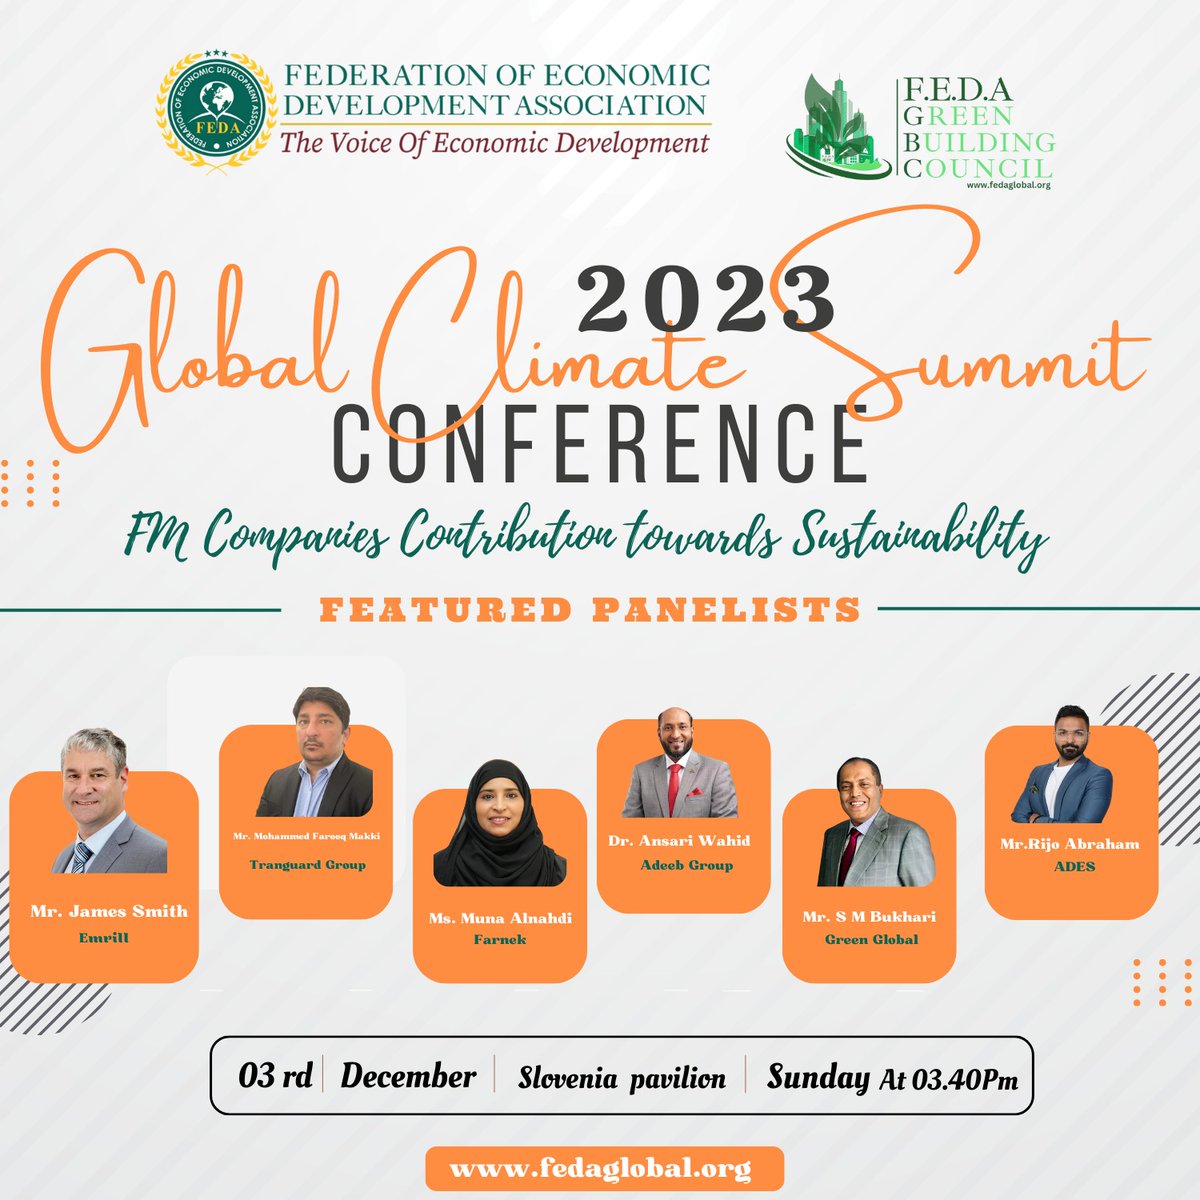 Excited to have Mr. Syed Mohamed Bukhari, our dedicated Vice Chairman, representing us at the Global Climate Summit Conference 2023! 🔥🌍 

#ClimateAction #ClimateChange #Sustainability #GlobalSummit #Conference2023 #Leadership #GreenFuture #EnvironmentalResponsibility